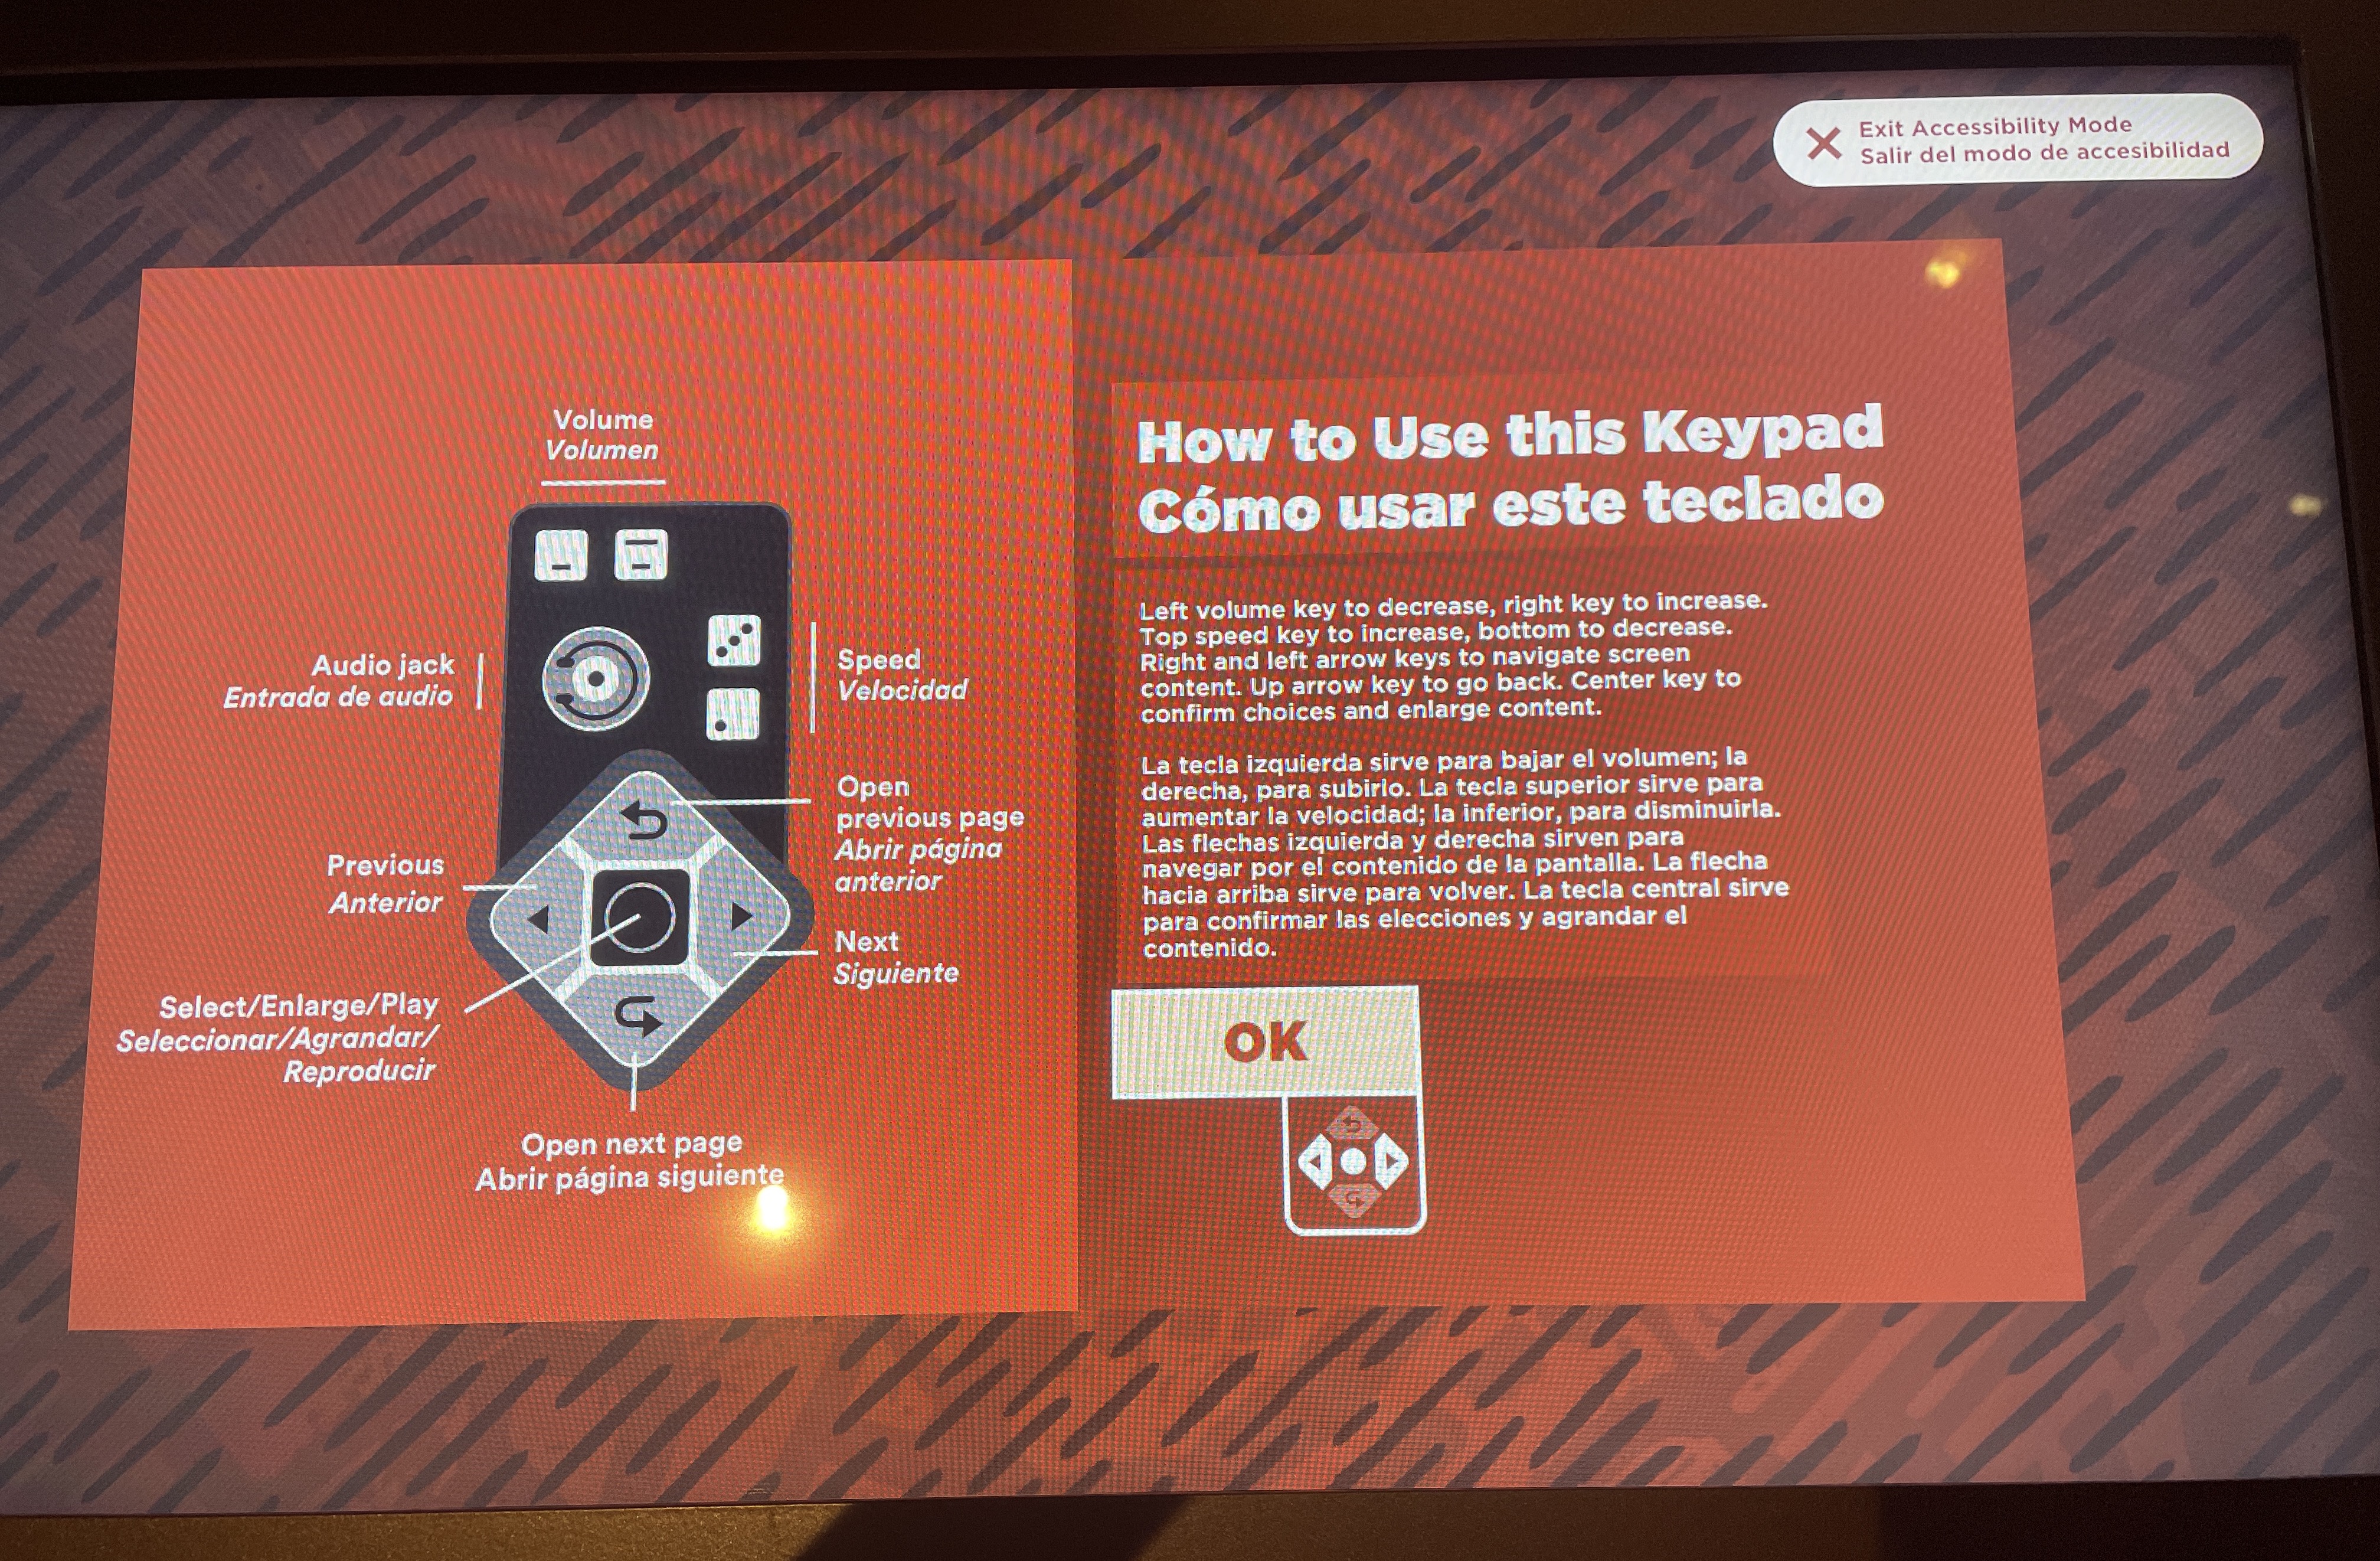 A digital screen with a black and red patterned background depicts instructions in Spanish and English on how to use the keypad controls